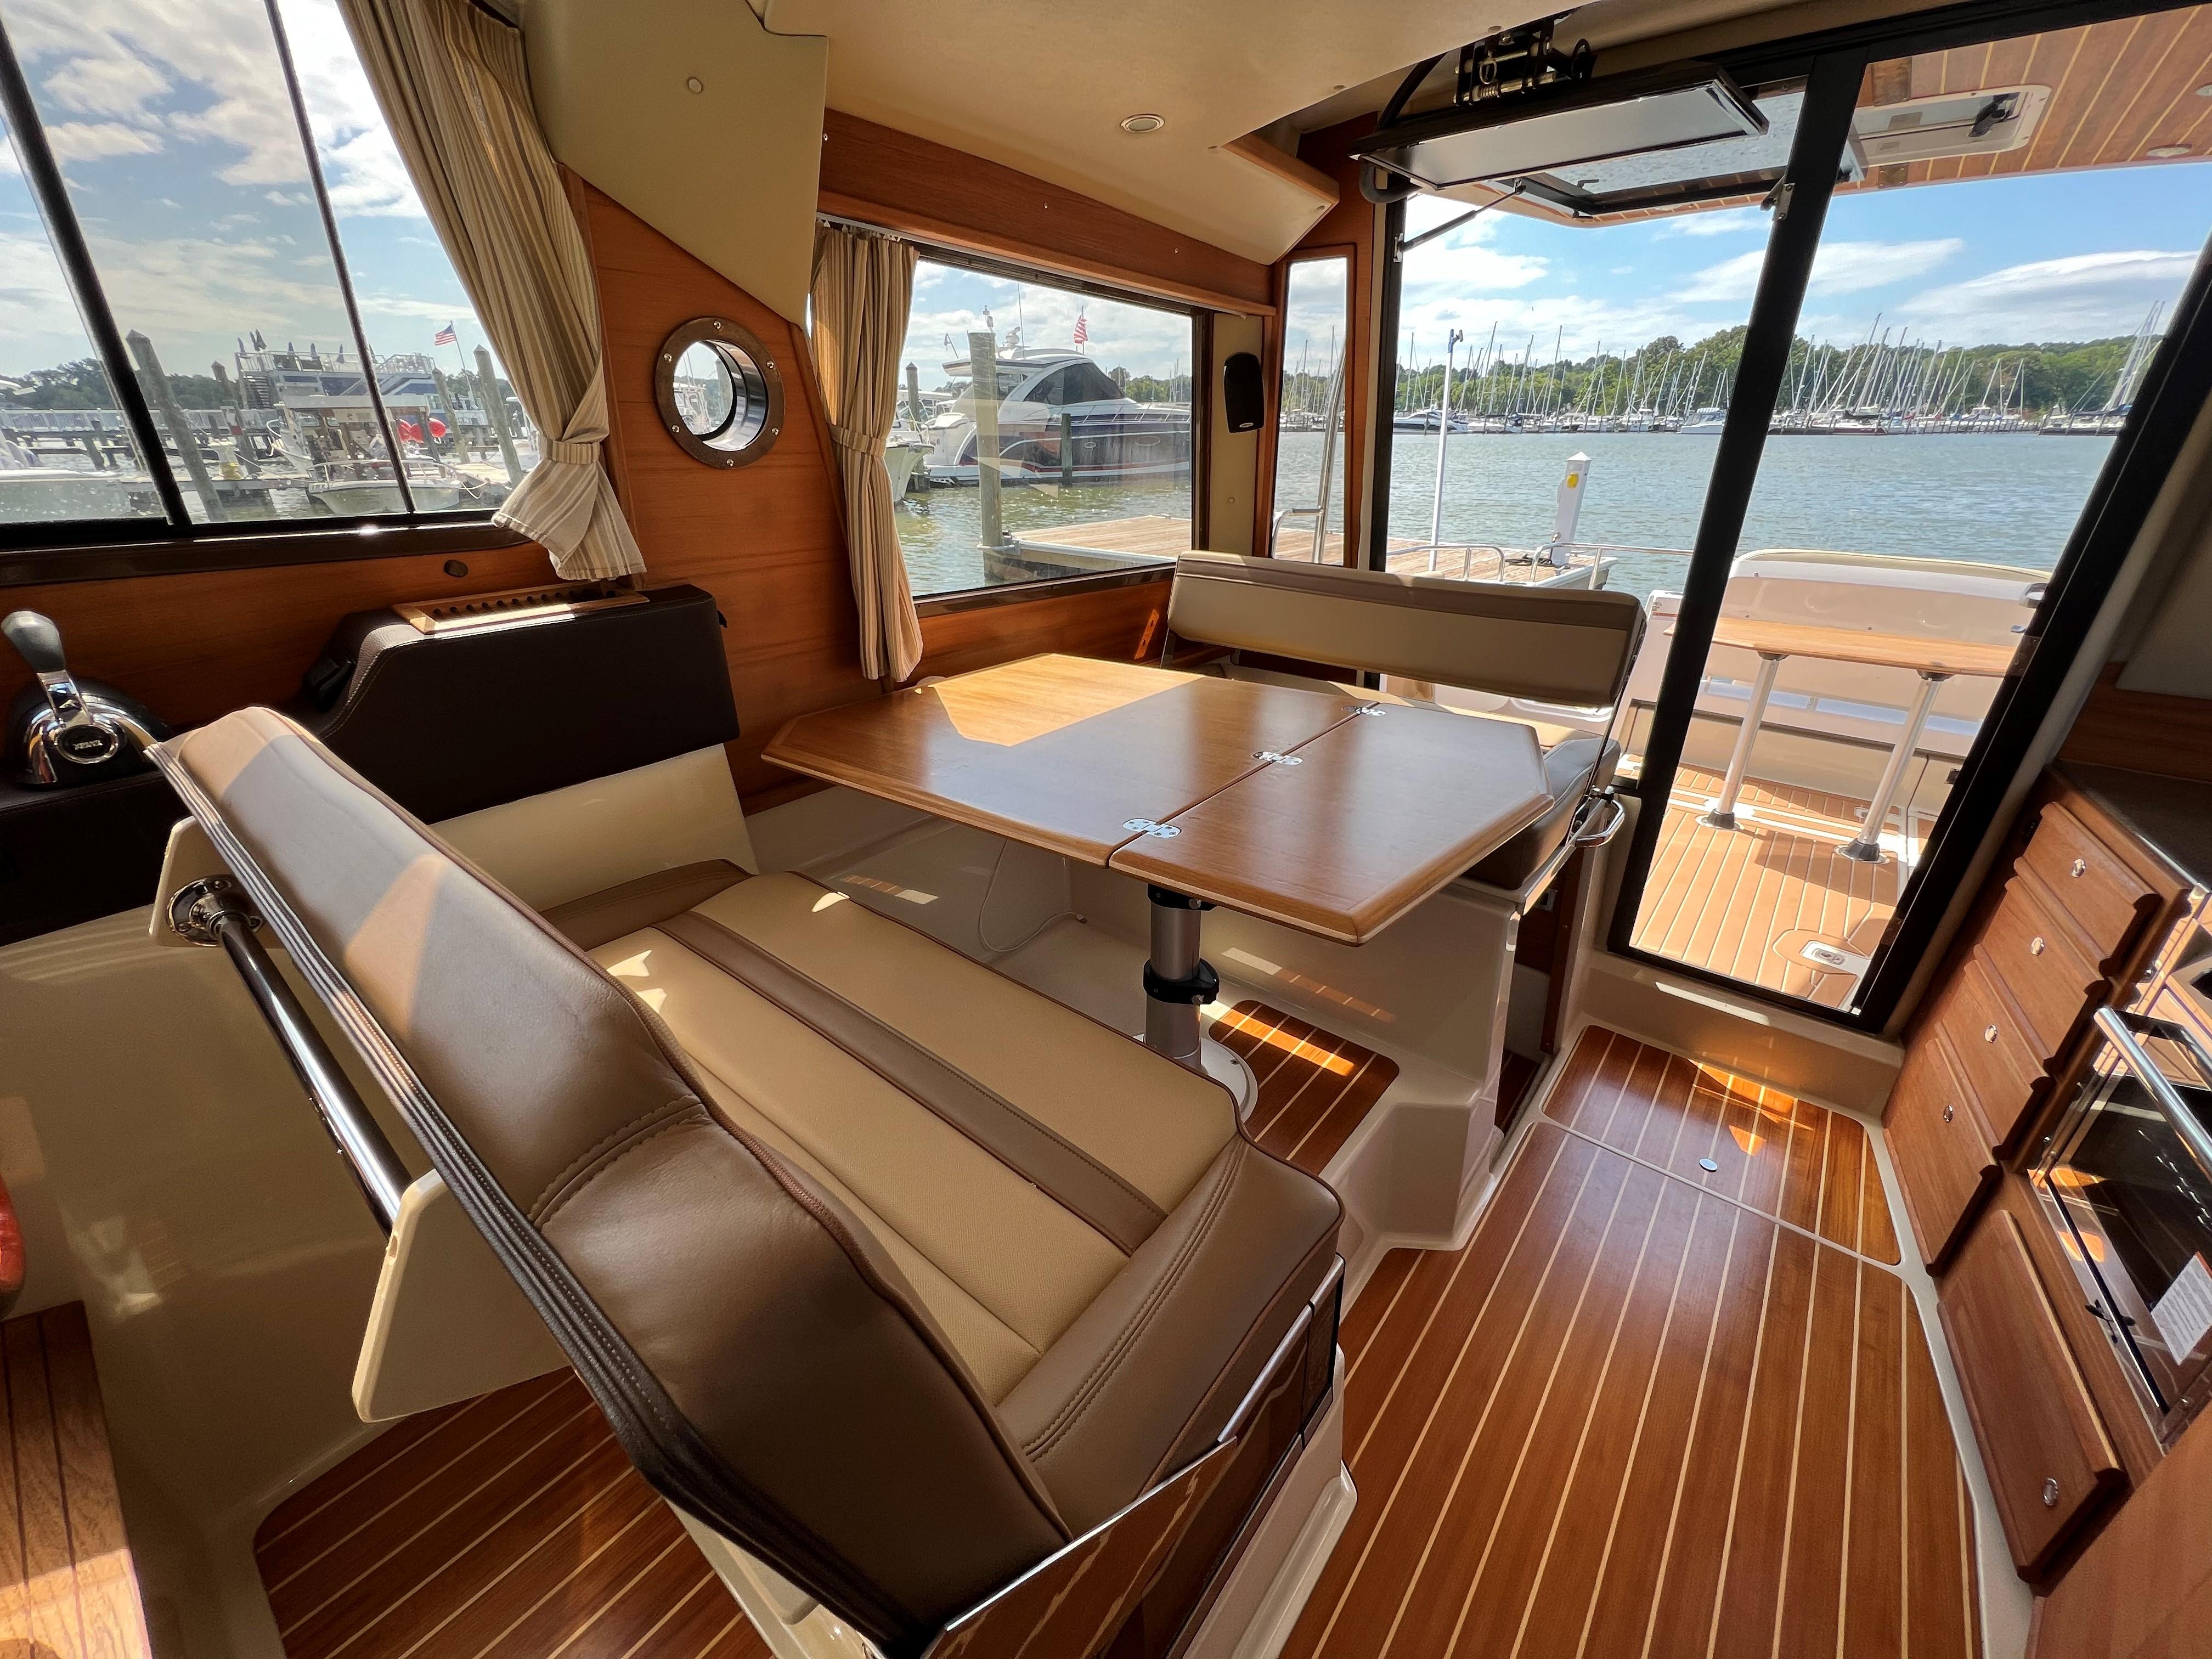 ADIONA Yacht Brokers of Annapolis